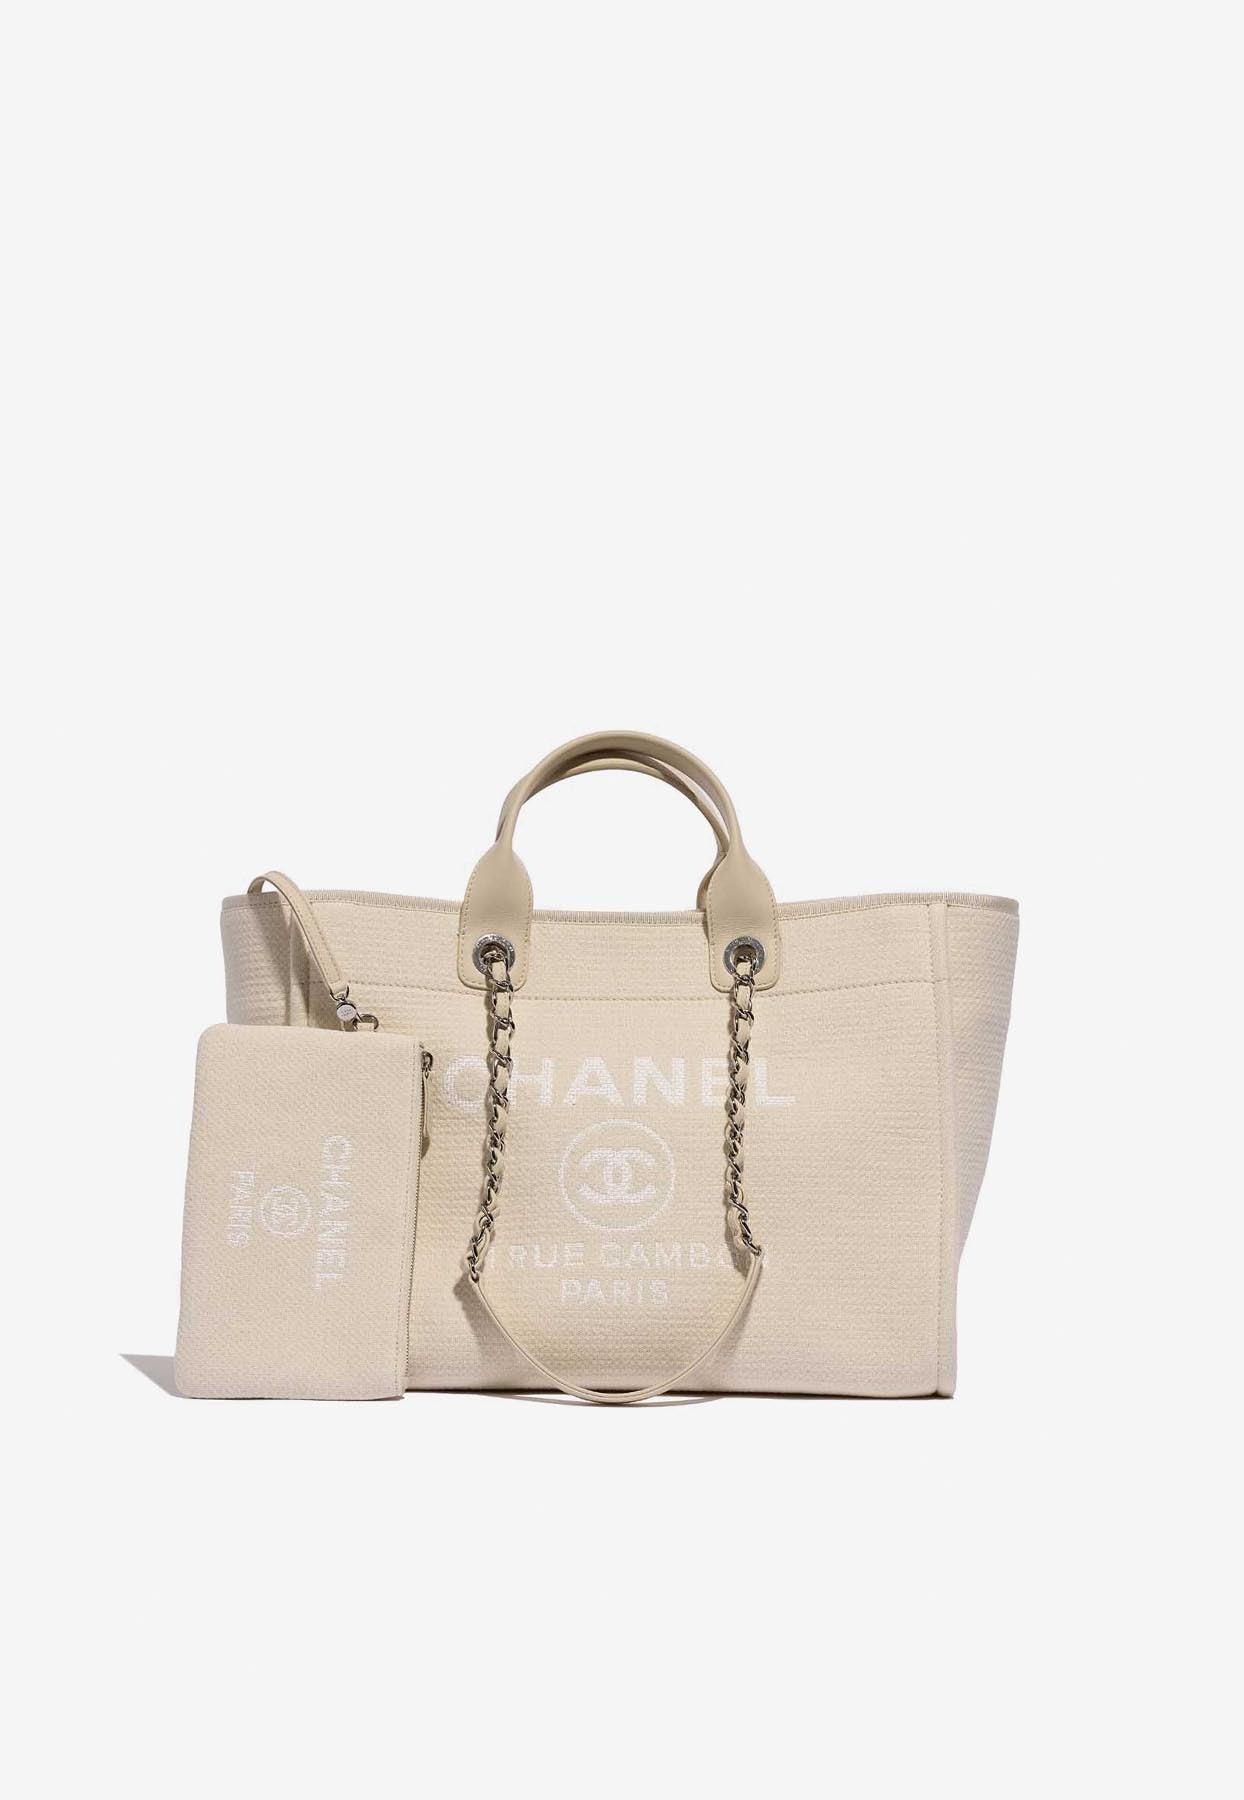 Chanel Medium Shopping Bag In Beige And White Canvas in Natural | Lyst